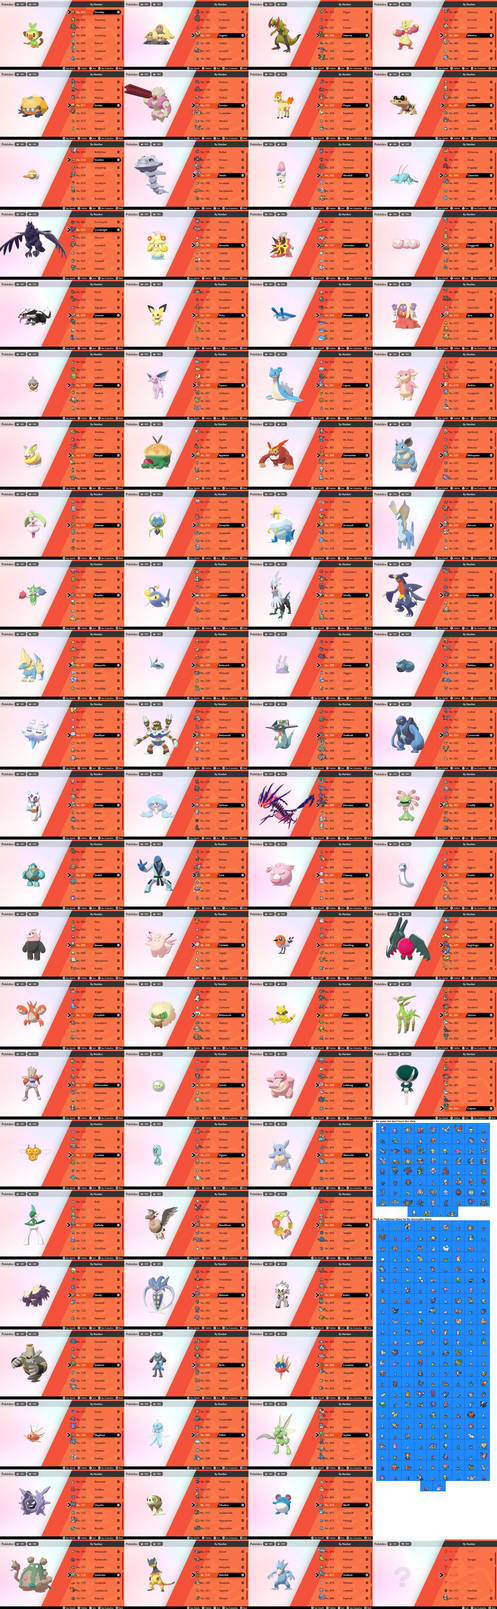 Pokesweet Type Chart by MBCMechachu on DeviantArt